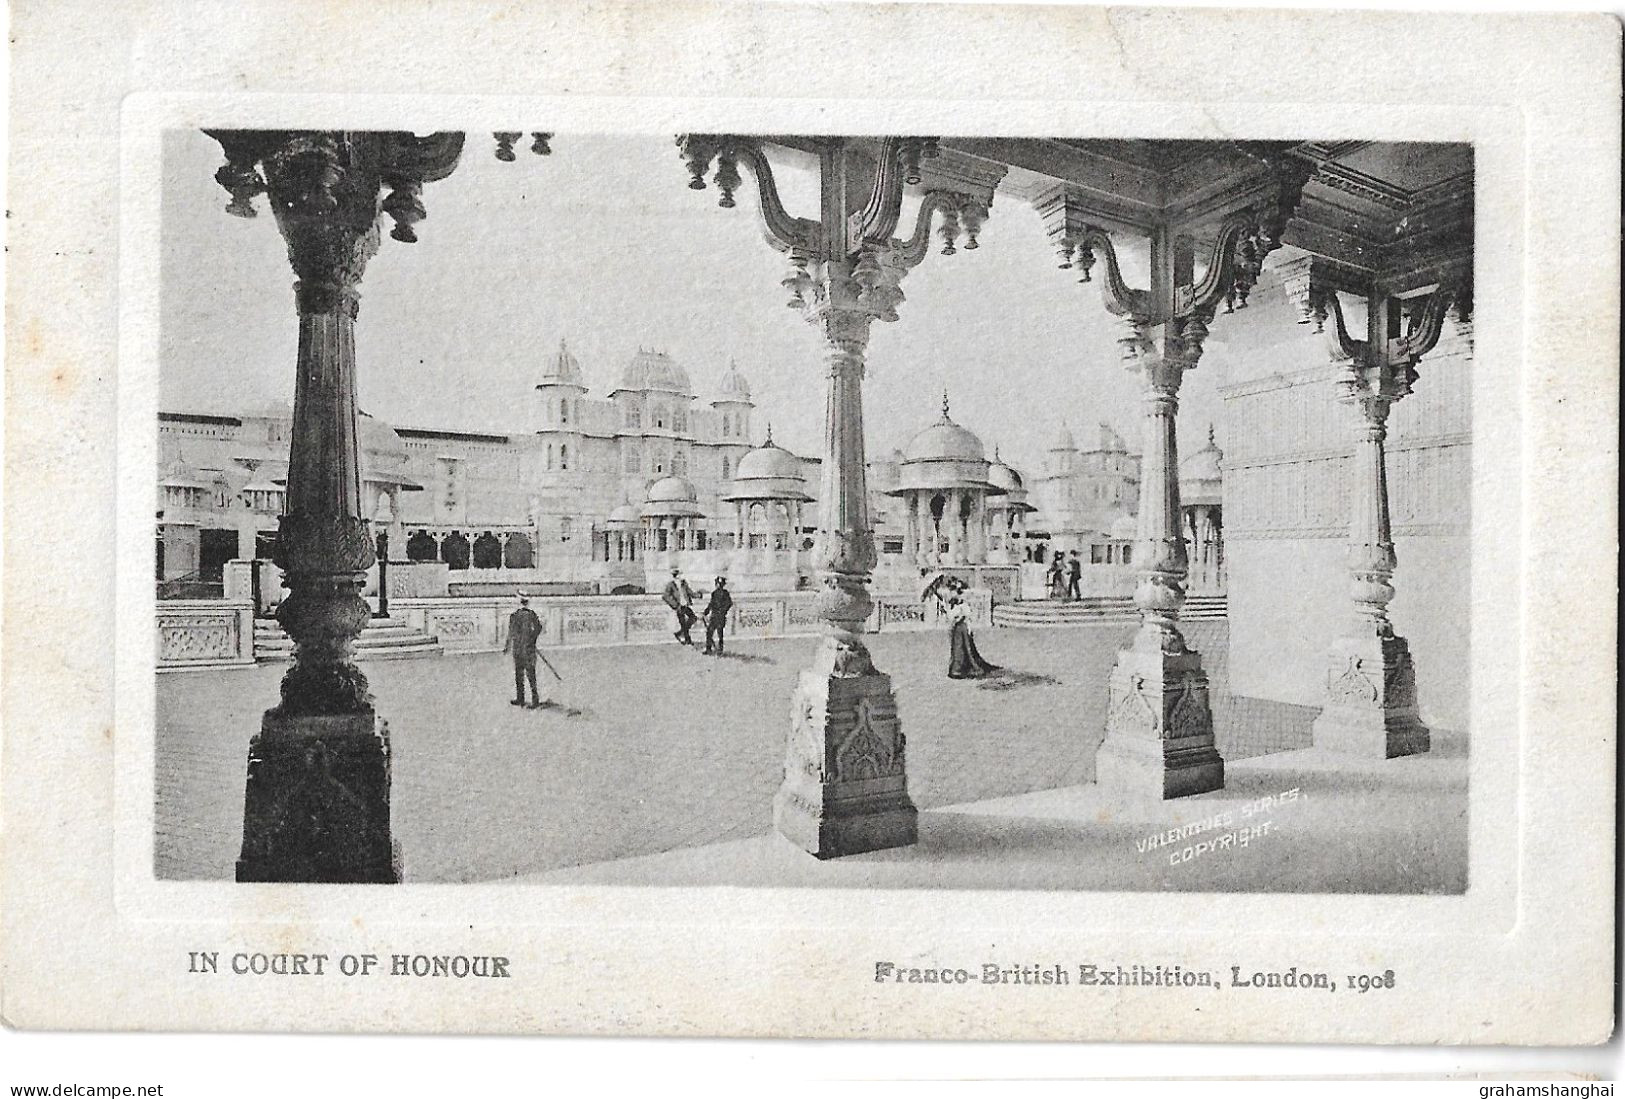 4 Postcards Lot UK London Franco-British Exhibition 1908 Various Views All Posted - Exhibitions